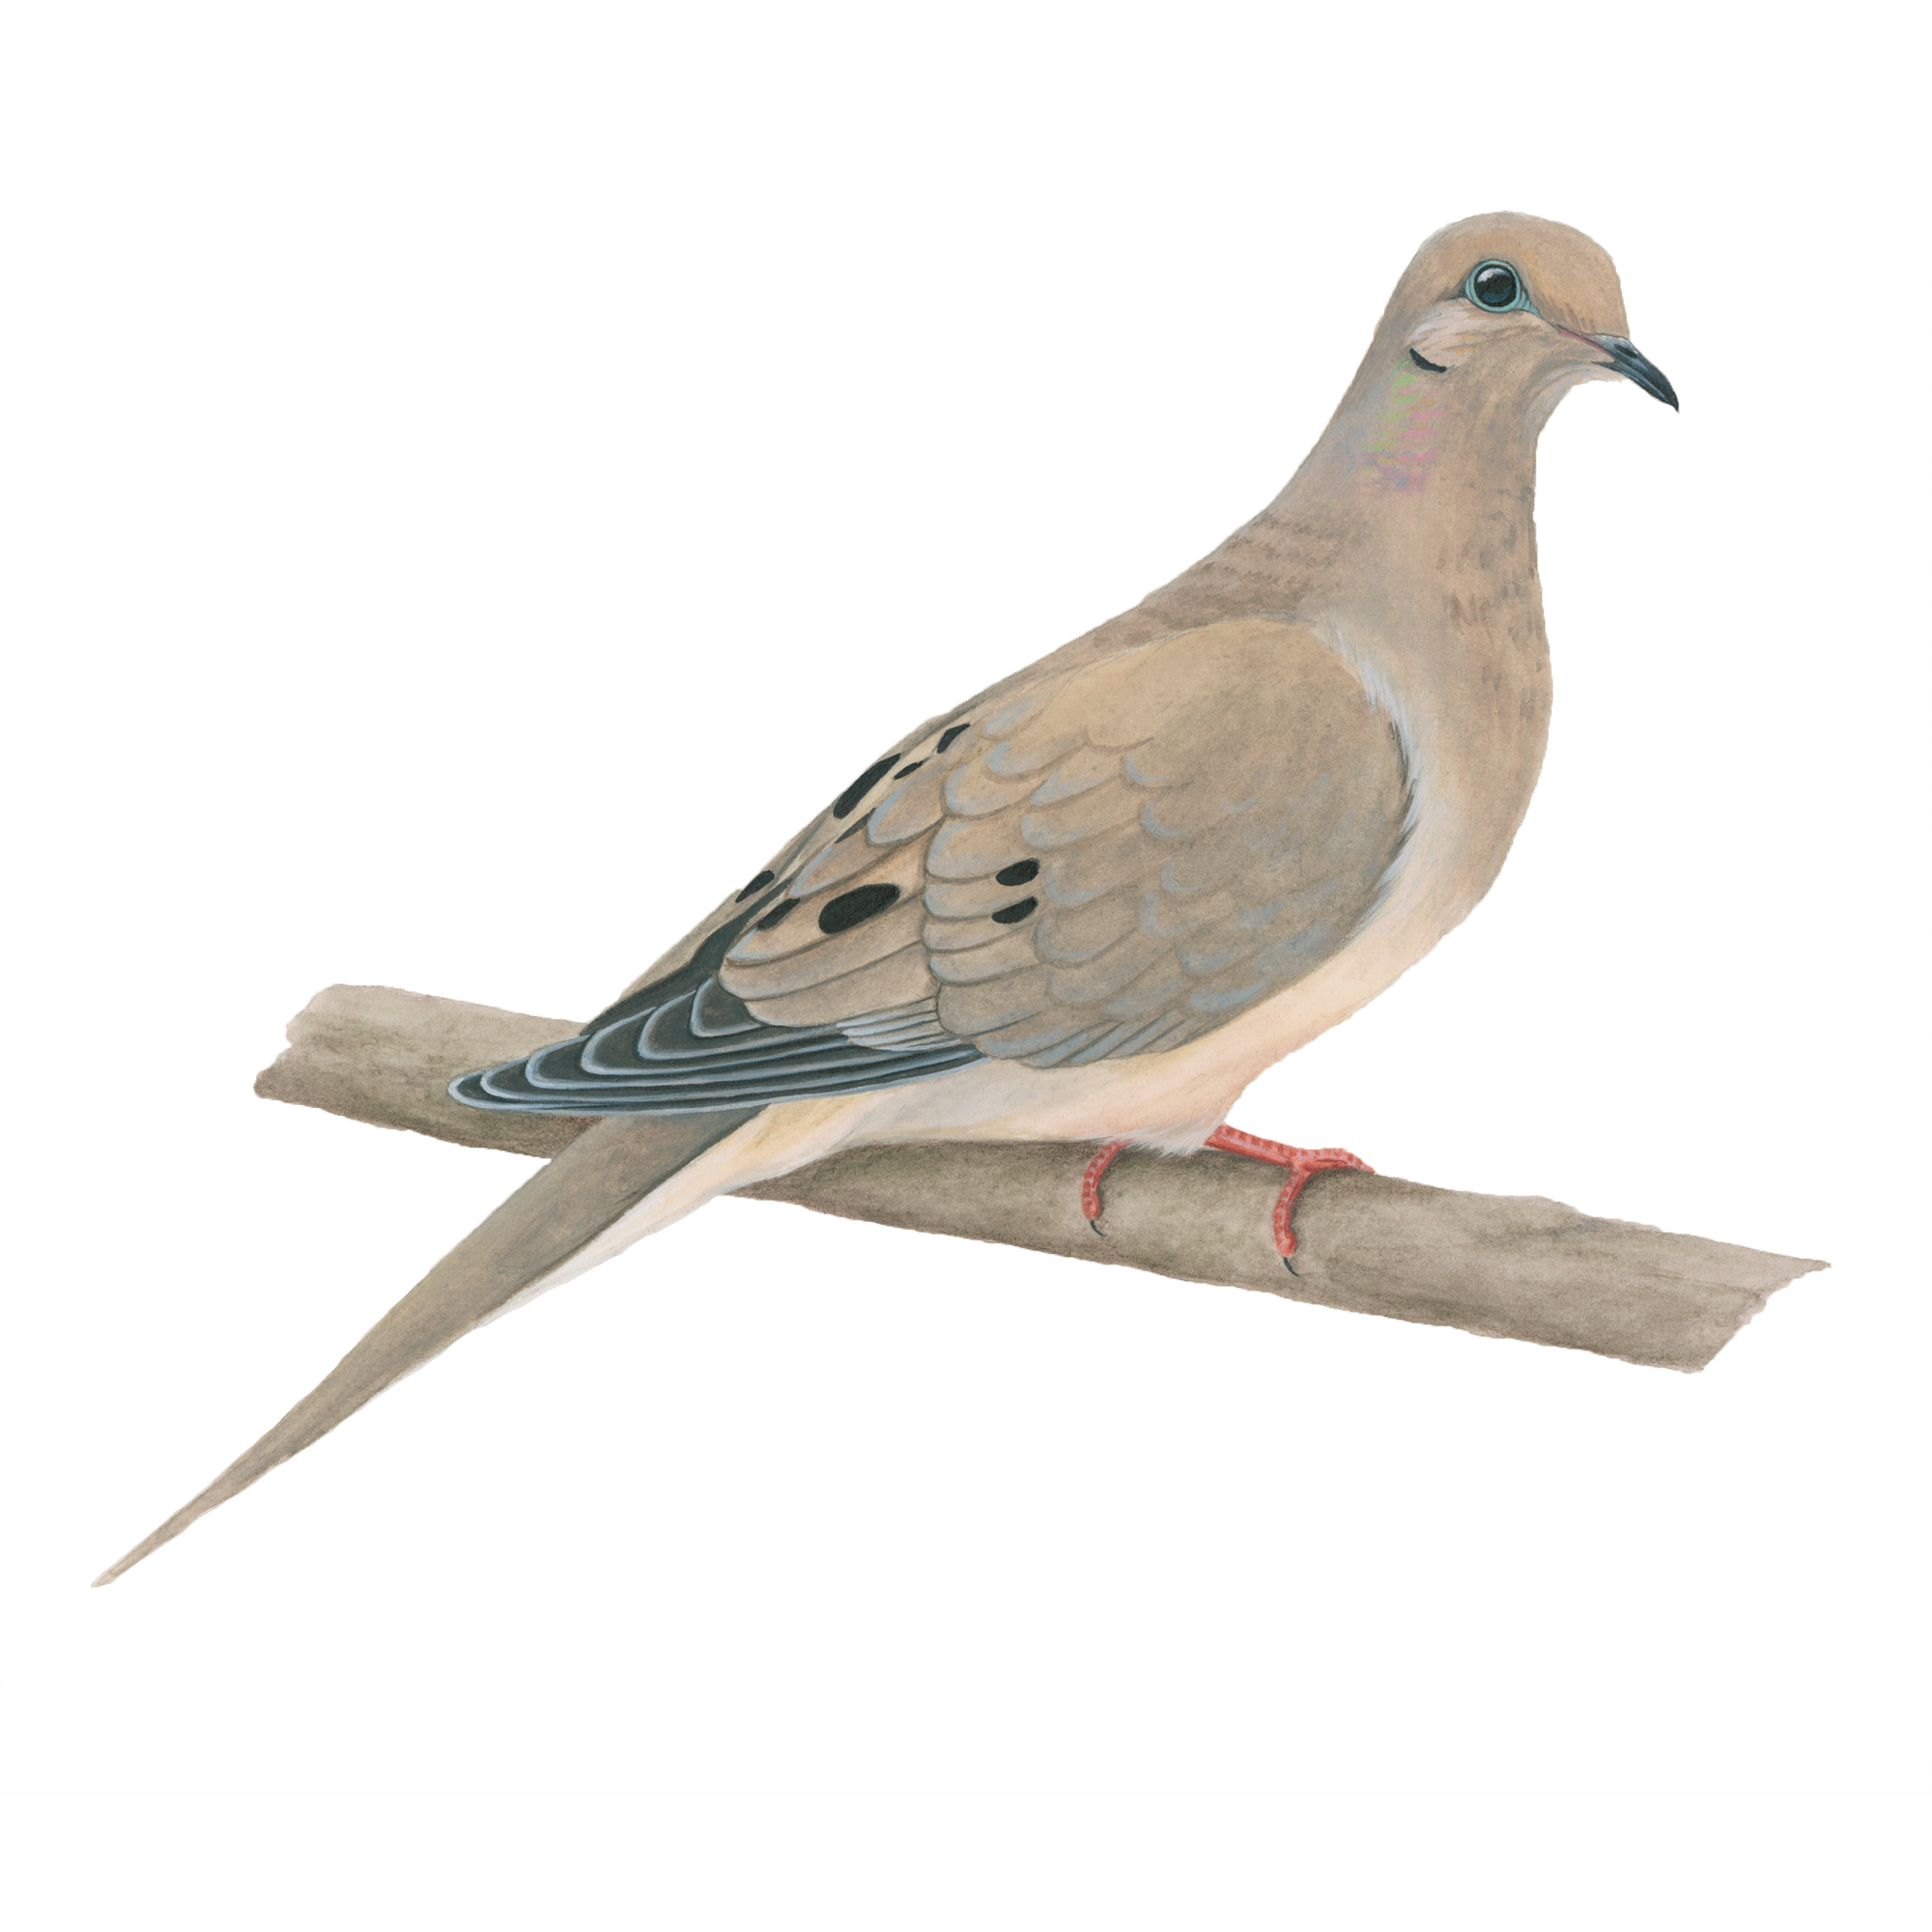 dove clipart mourning dove